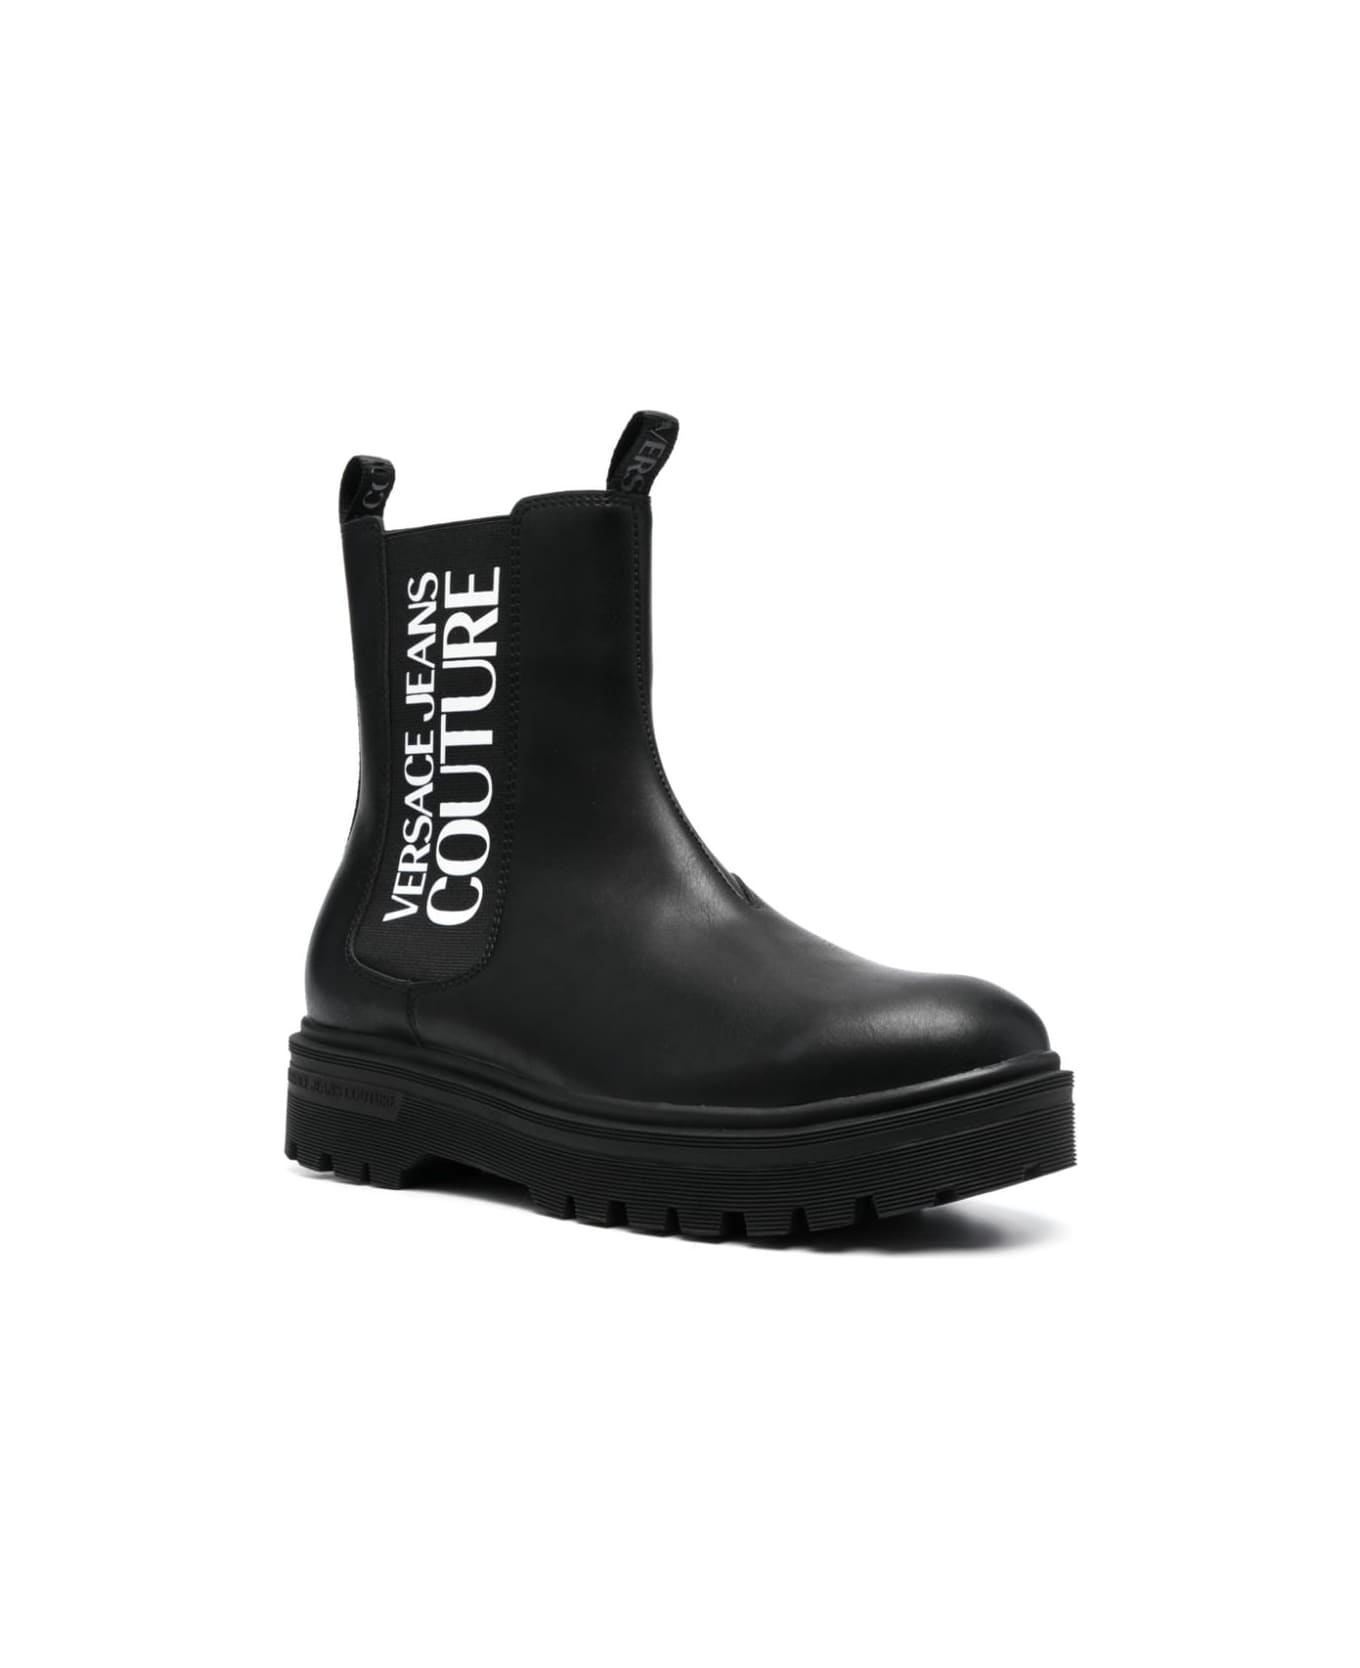 Versace Jeans Couture Syrius Dis47 Boots - Black ブーツ